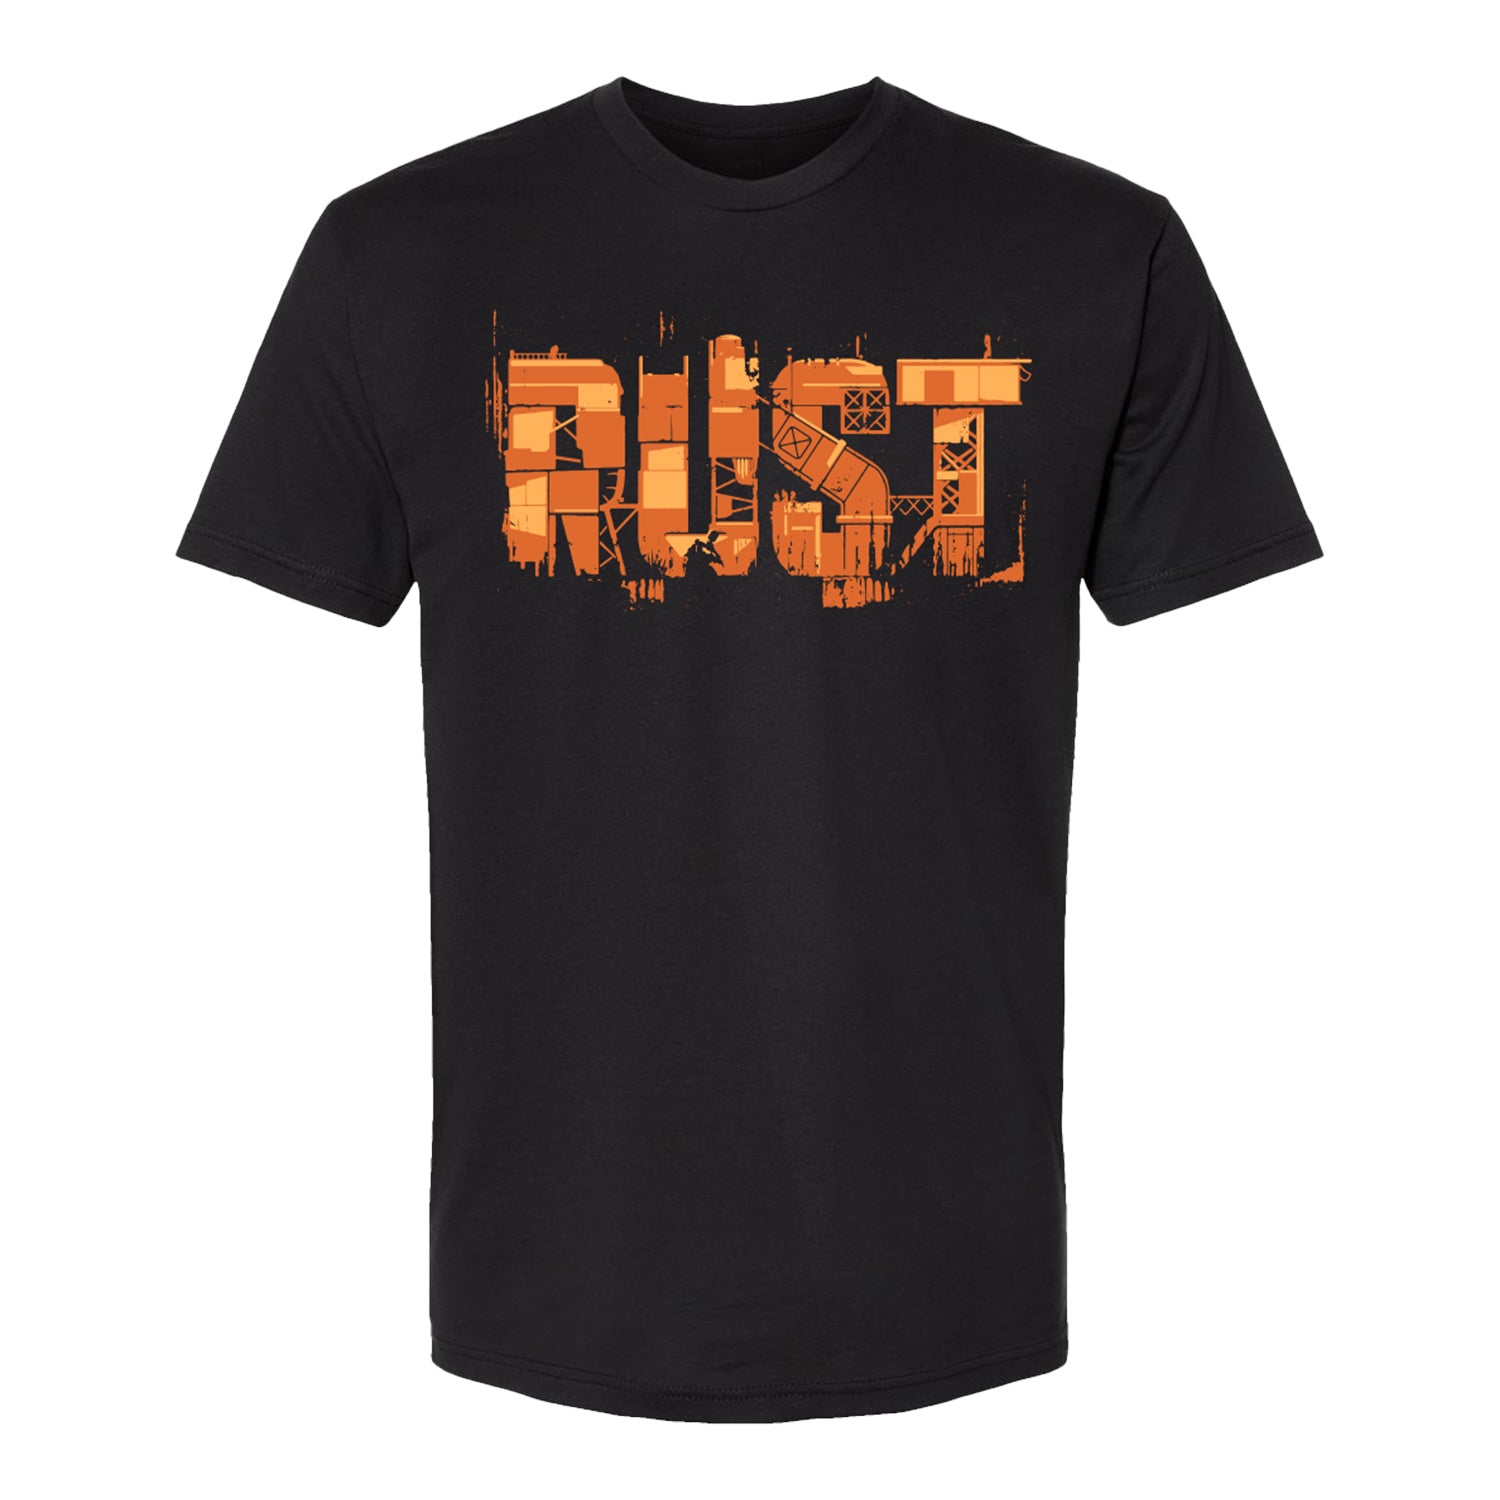 Call of Duty Rust Black T-Shirt - Call of Duty Store